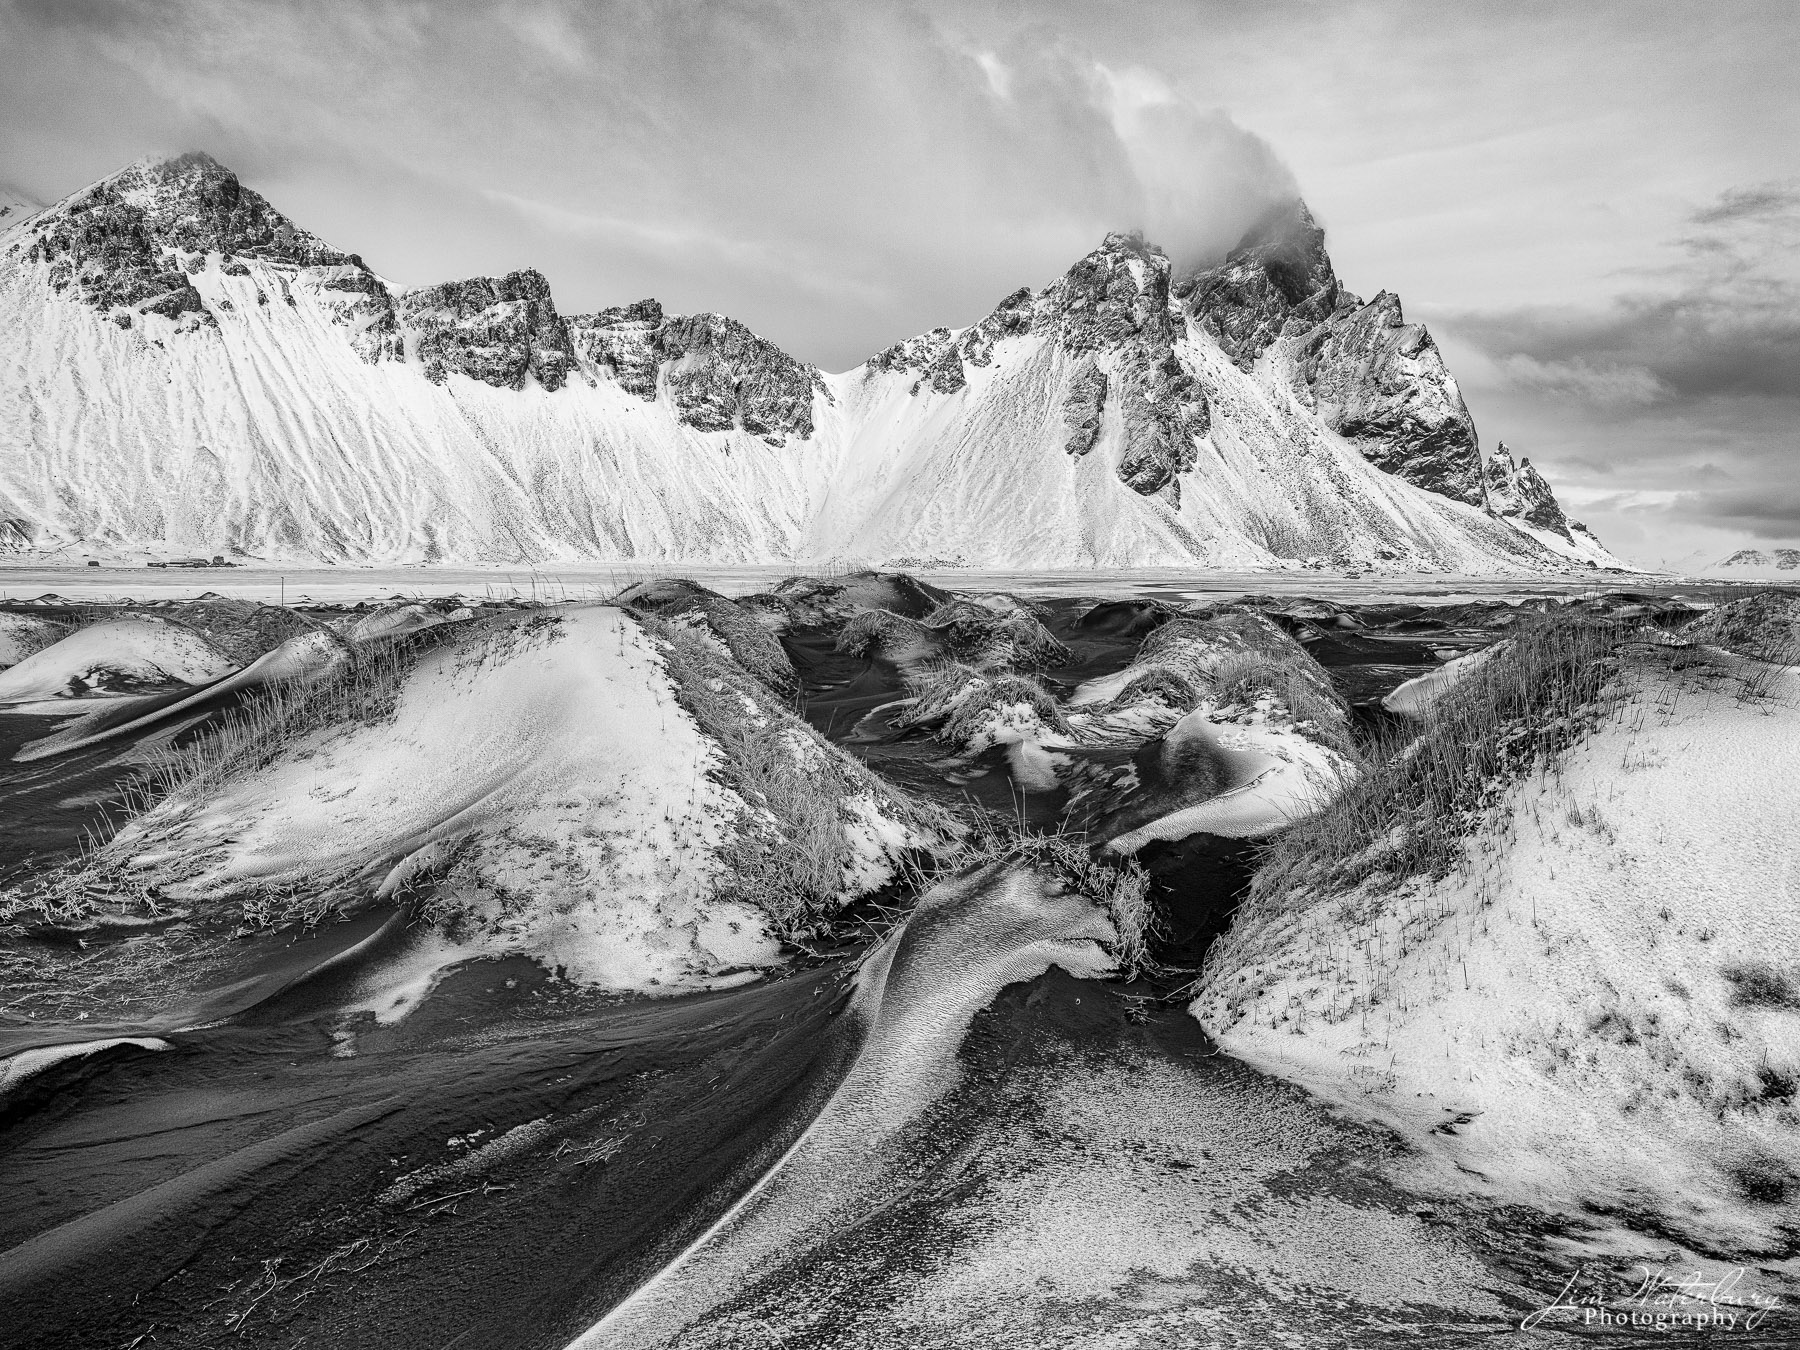 Black & white image of the mounds of black sand at Stokksnes beach in Iceland, covered by a dusting of snow, and against the...